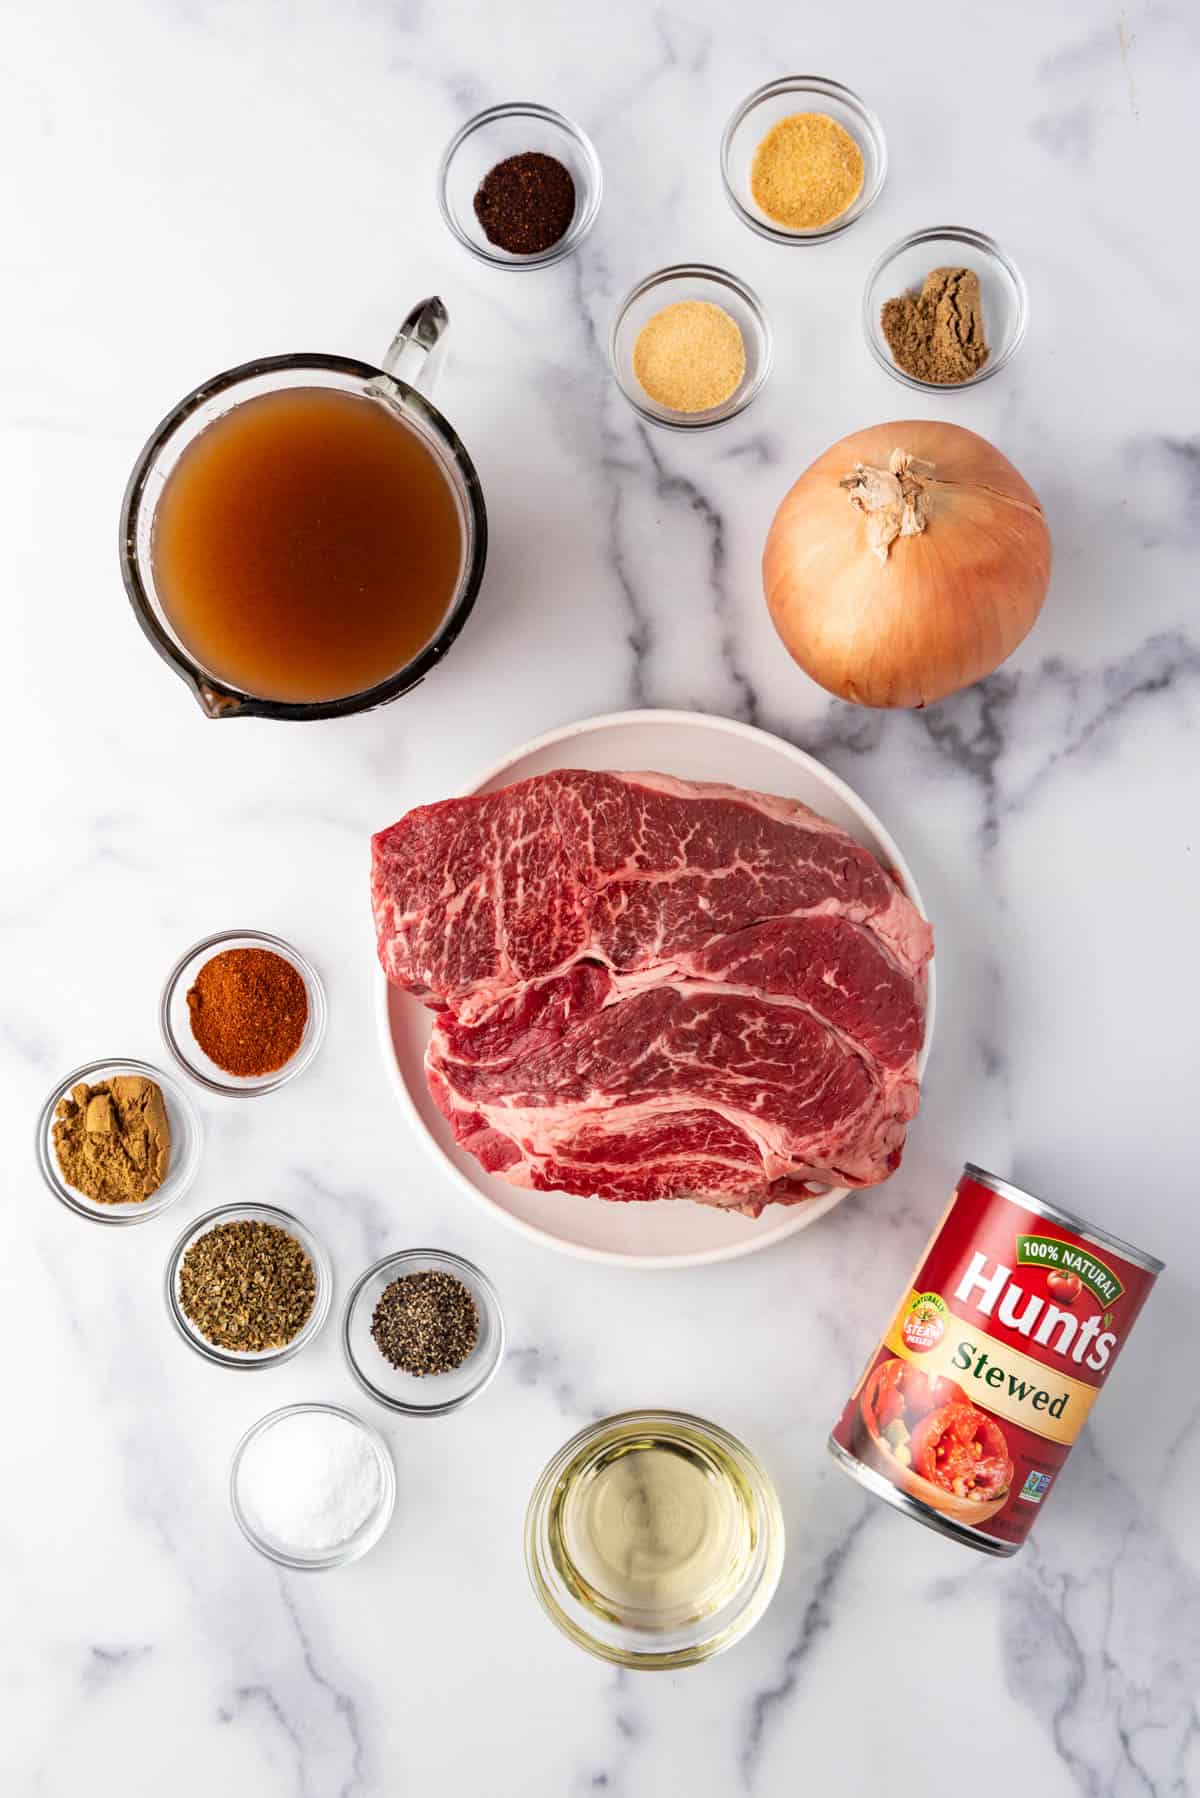 An overhead image of ingredients for making Mexican shredded beef.